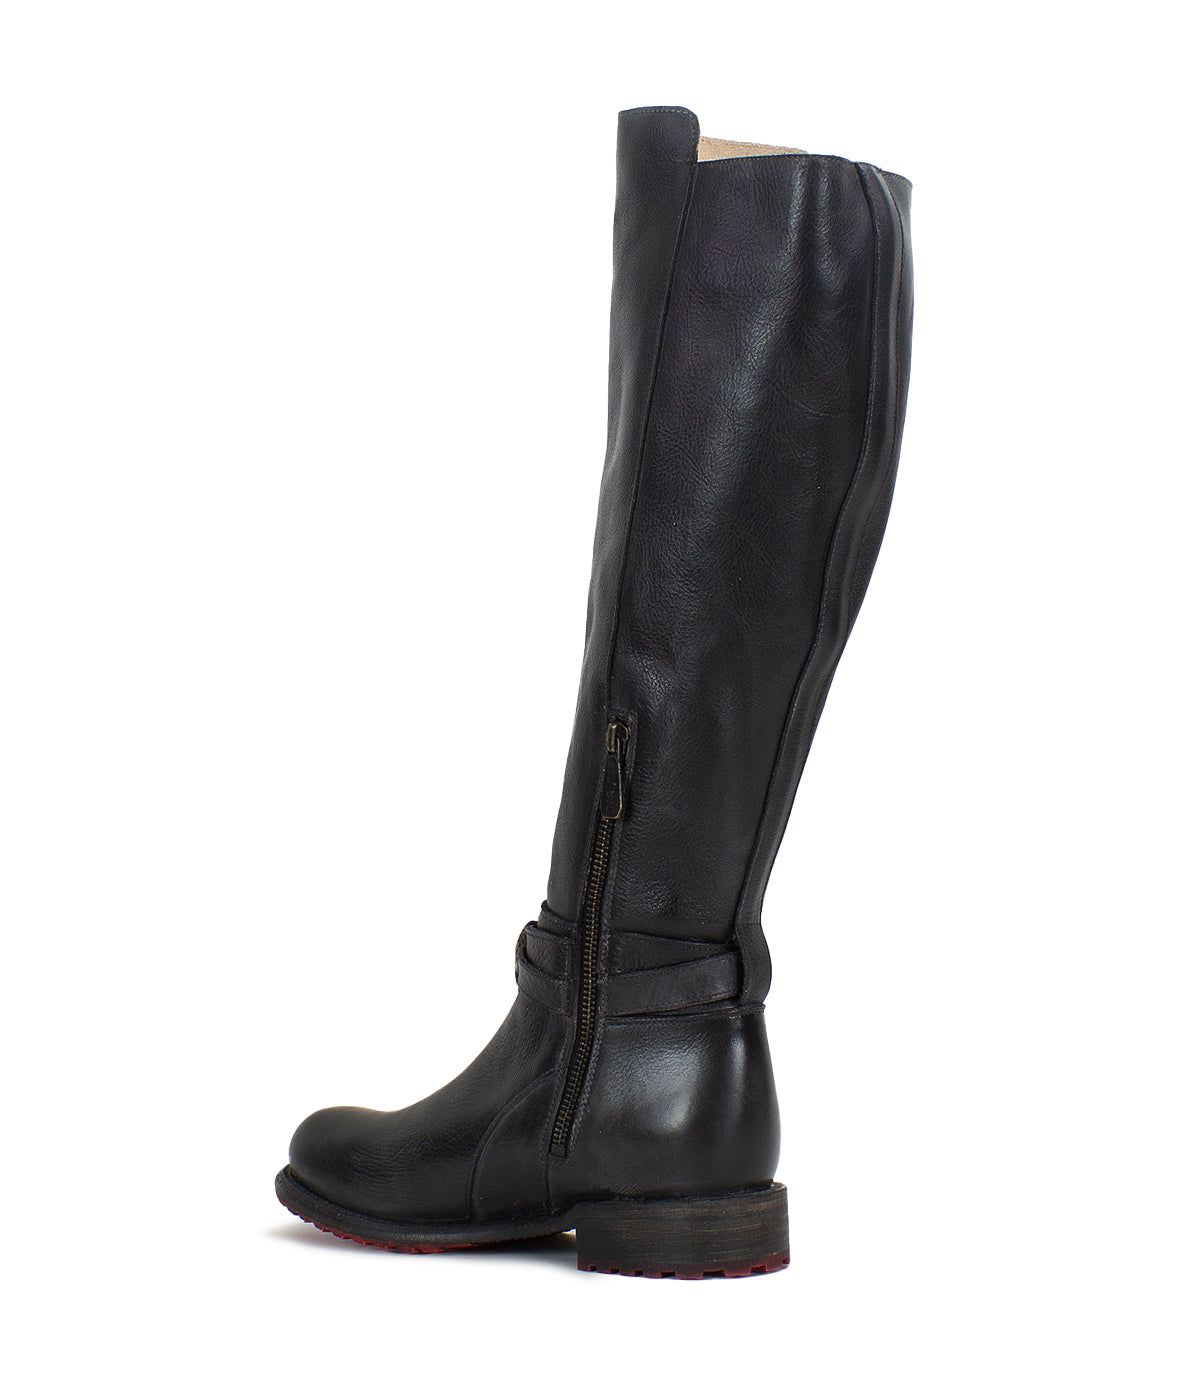 A women's black leather Bristol boot with a zipper on the side, made by Bed Stu.